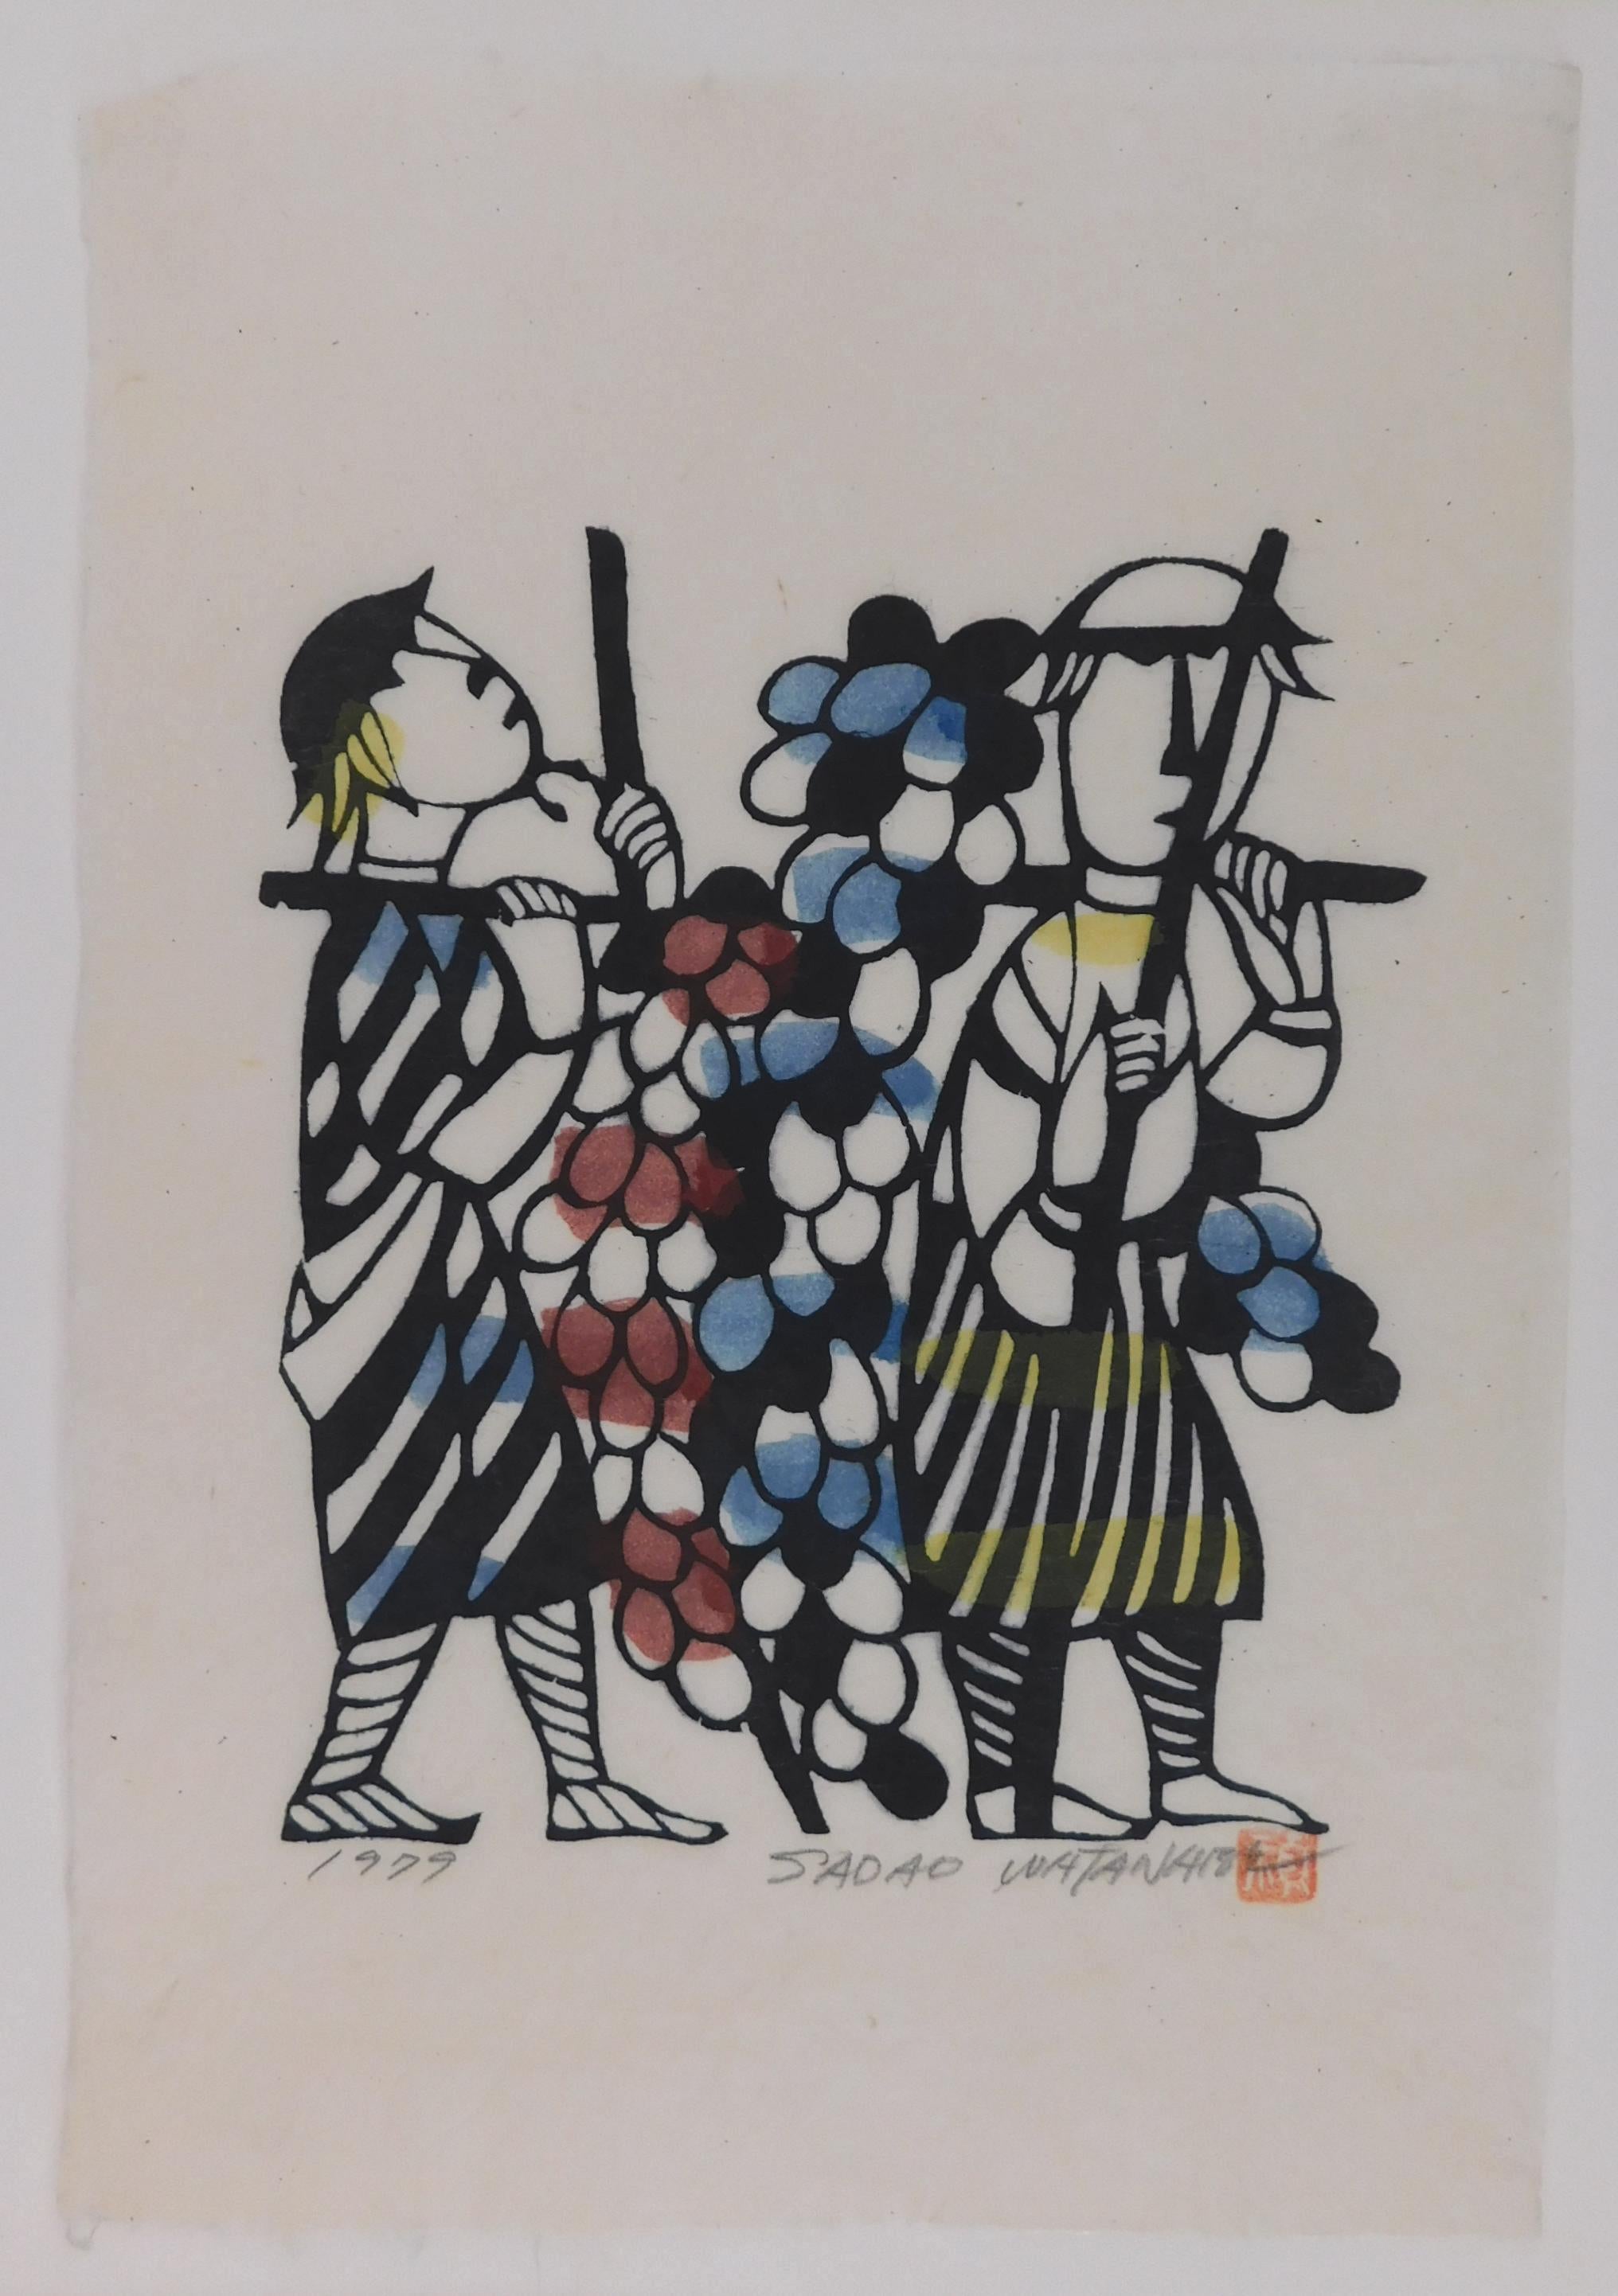 Stencil Print by Sadao Watanabe, hand colored on hand-made washi paper.
The image is from the story of Moses: Numbers 13:23, 'and they came to the valley of Eshcol, and cut down from there a branch with a single cluster of grapes, and they carried